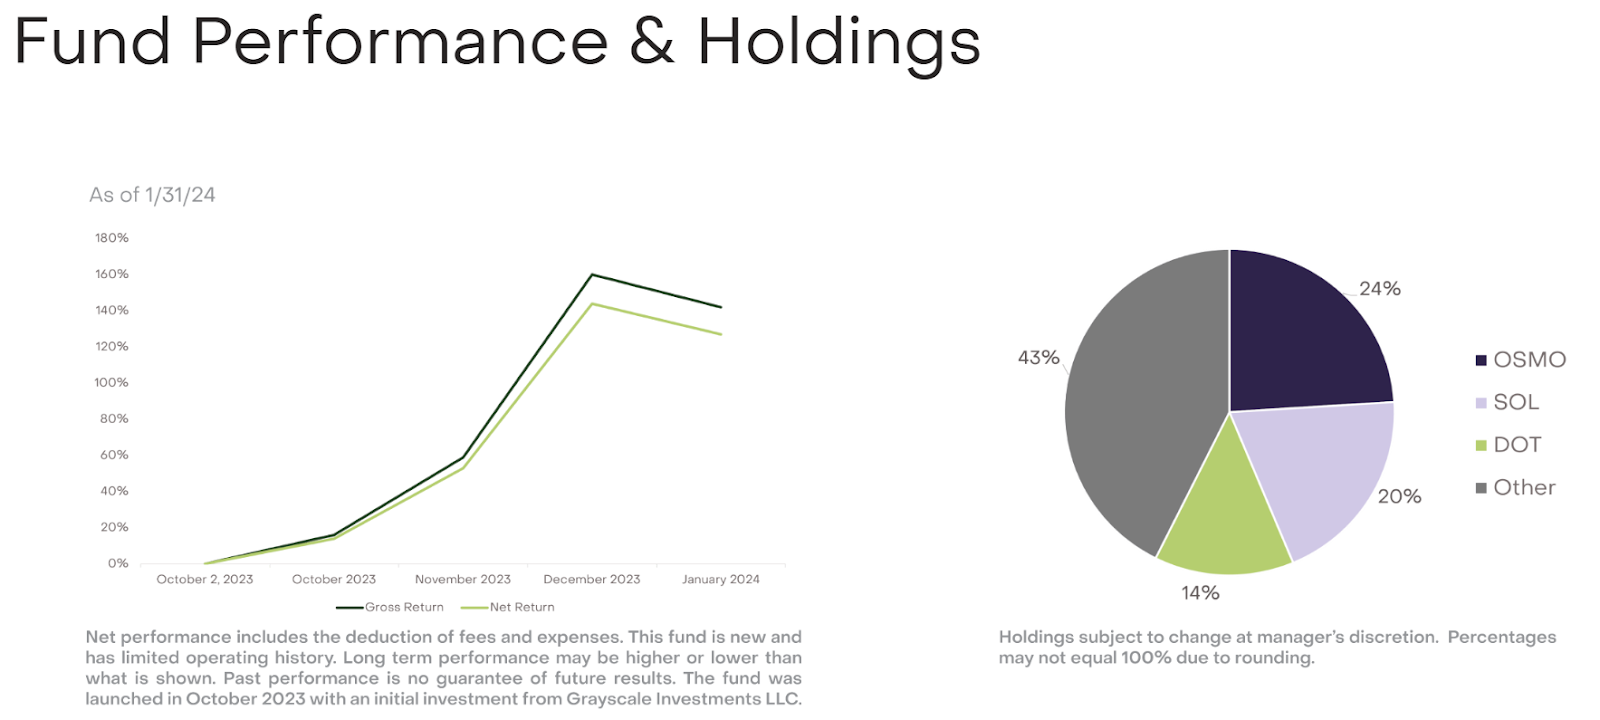 Grayscale Fund Performance & Holdings. 